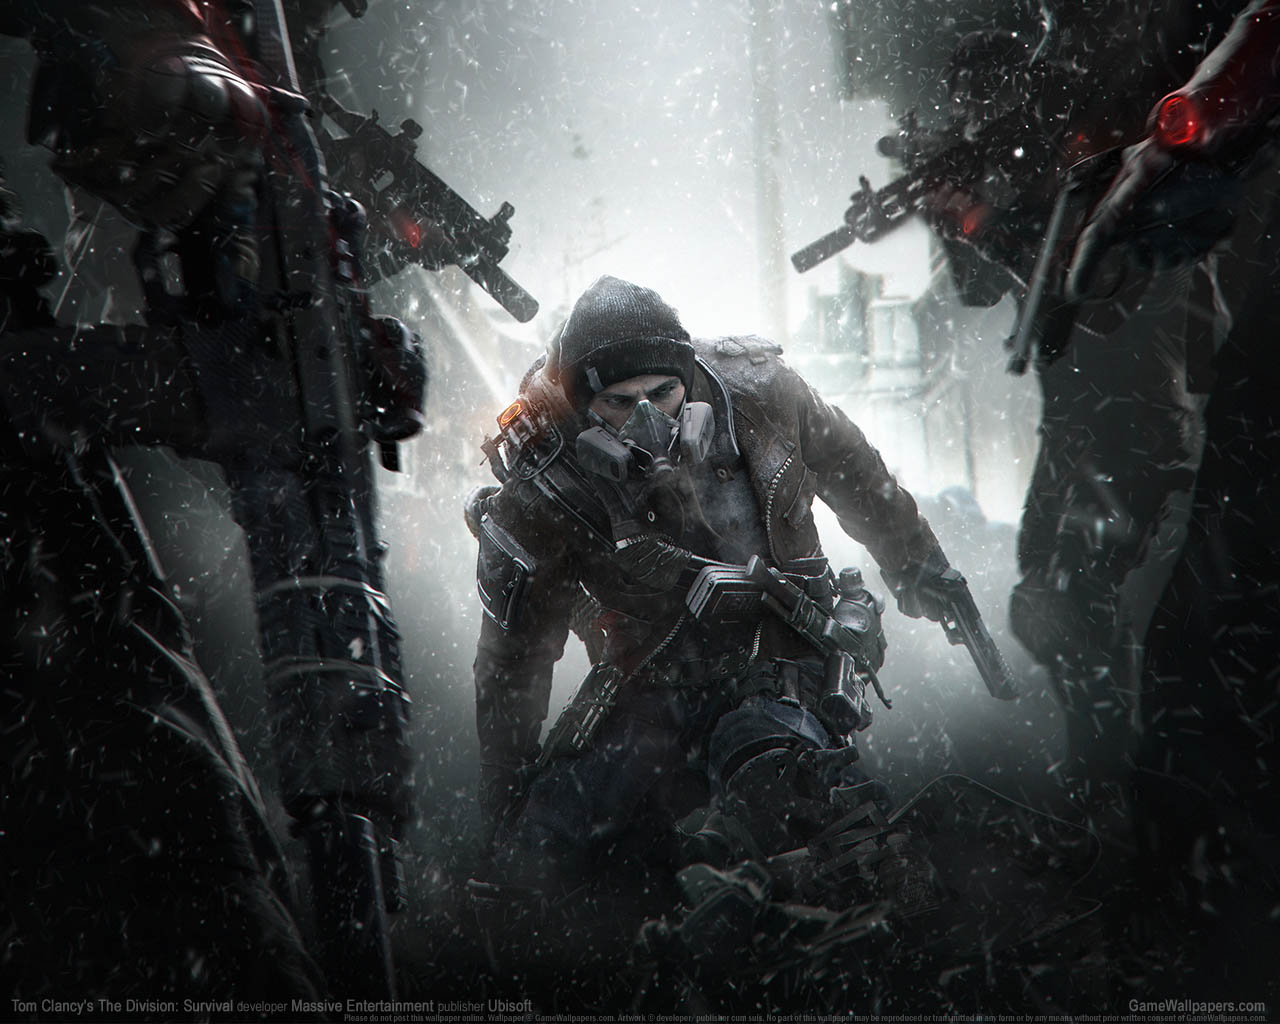 Tom Clancy's The Division: Survivalνmmer=01 fond d'cran  1280x1024